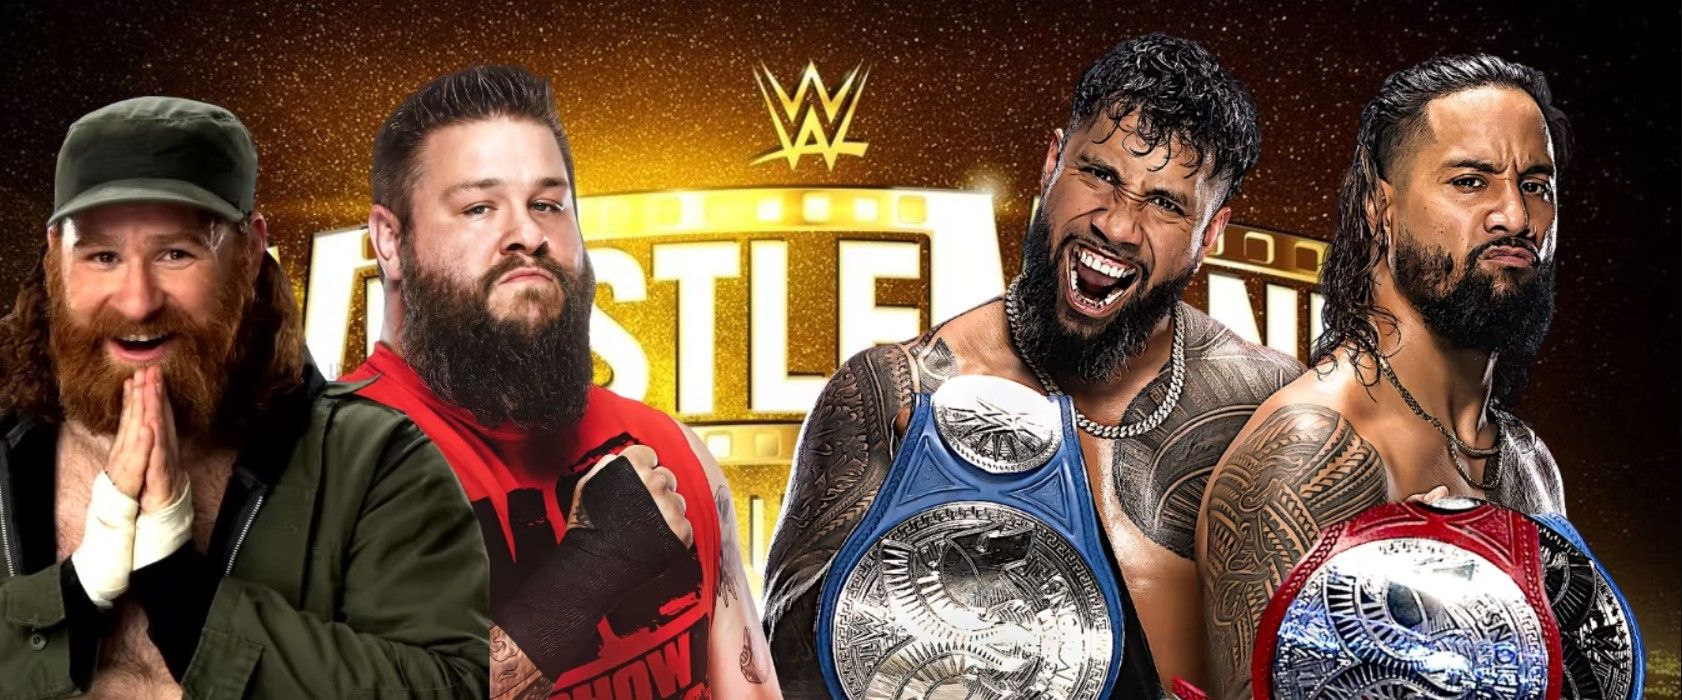 Kevin Owens and Sami Zayn could face the Usos at WrestleMania 39